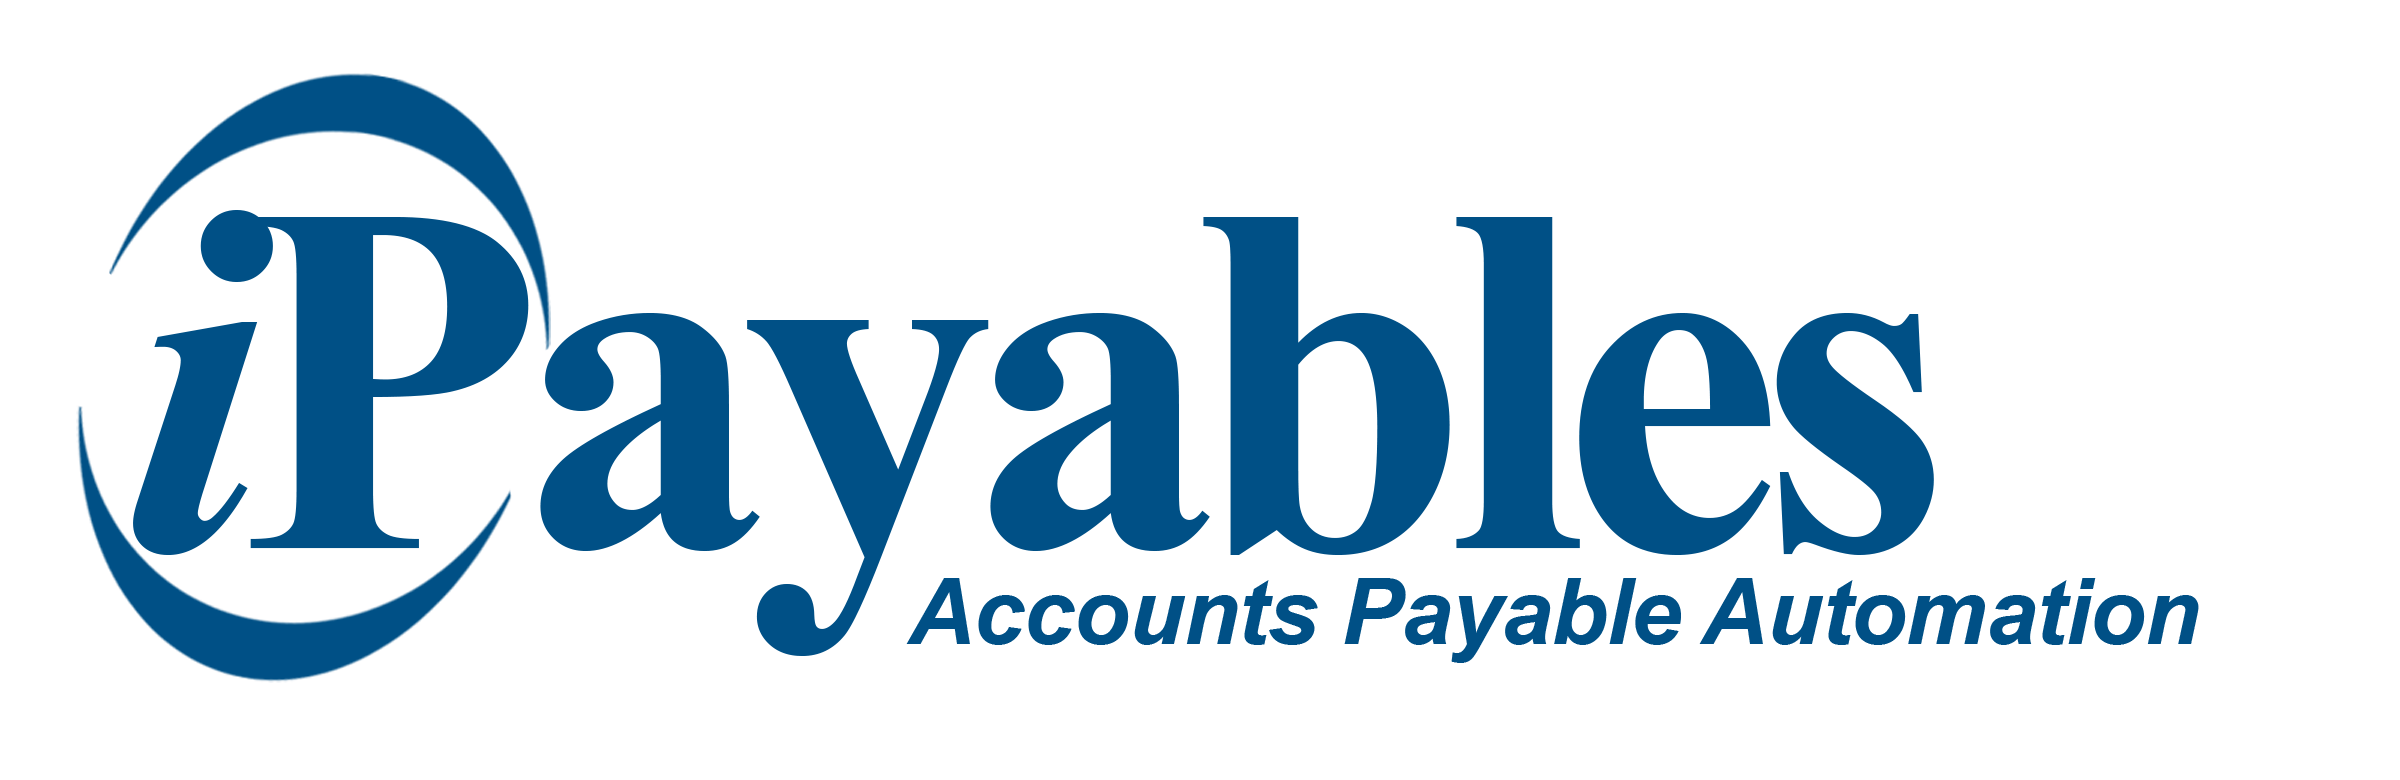 Featured Image for iPayables, Inc.